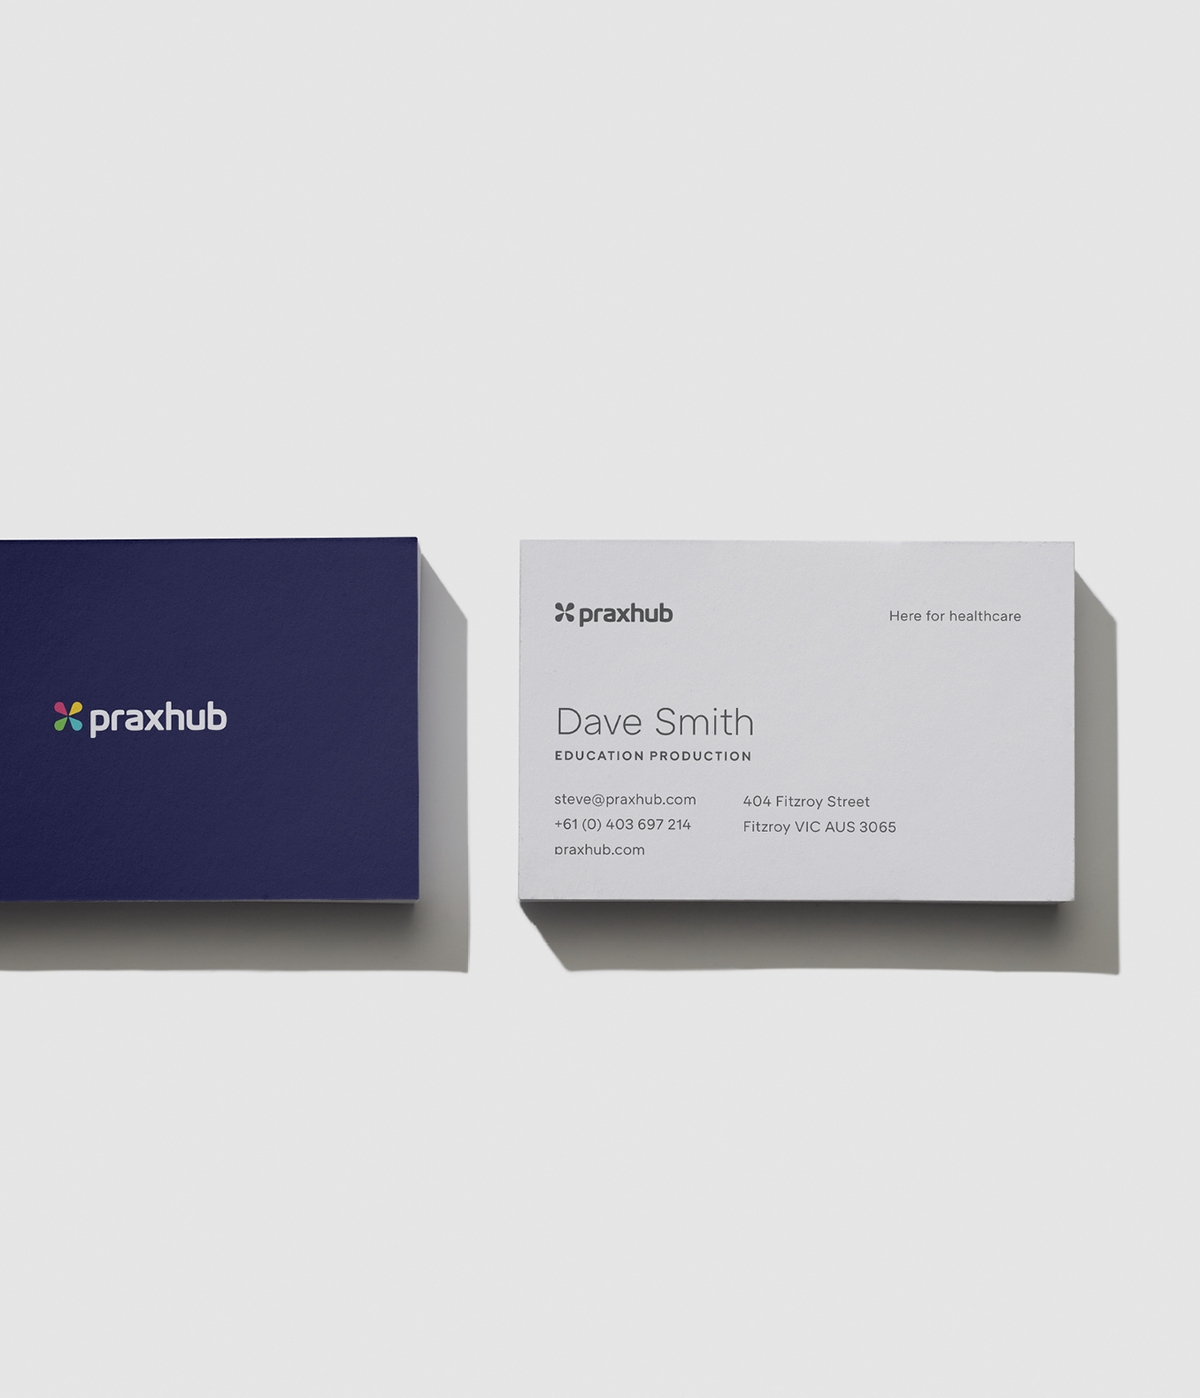 Praxhub - Printed Business Card - Brand Strategy - Here for Healthcare | Atollon - a design company